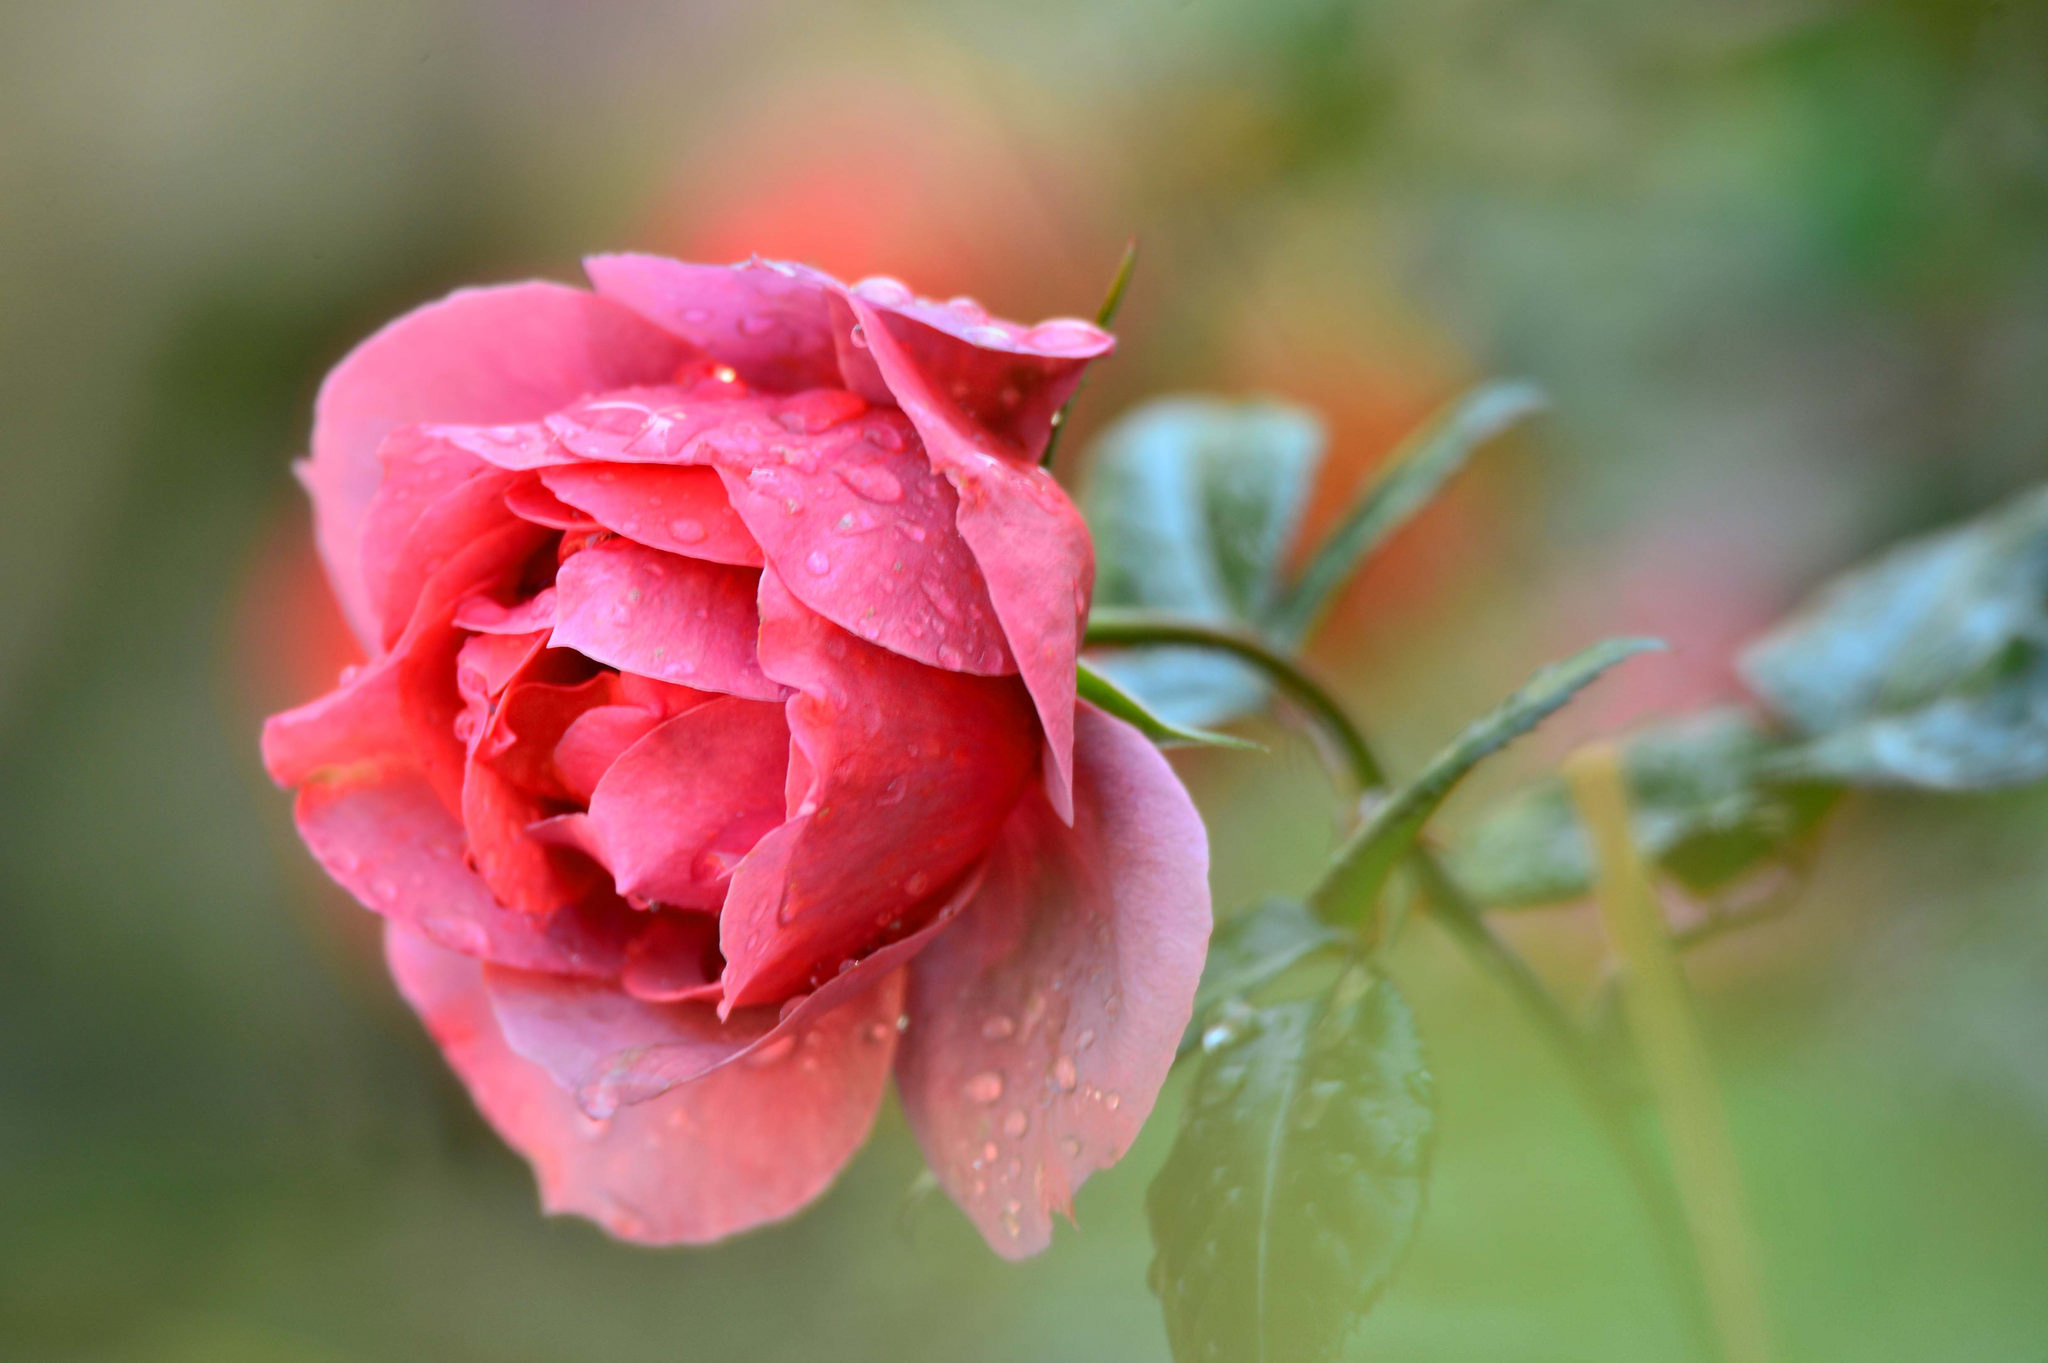 71942 download wallpaper drops, macro, rose flower, rose, petals, bud screensavers and pictures for free